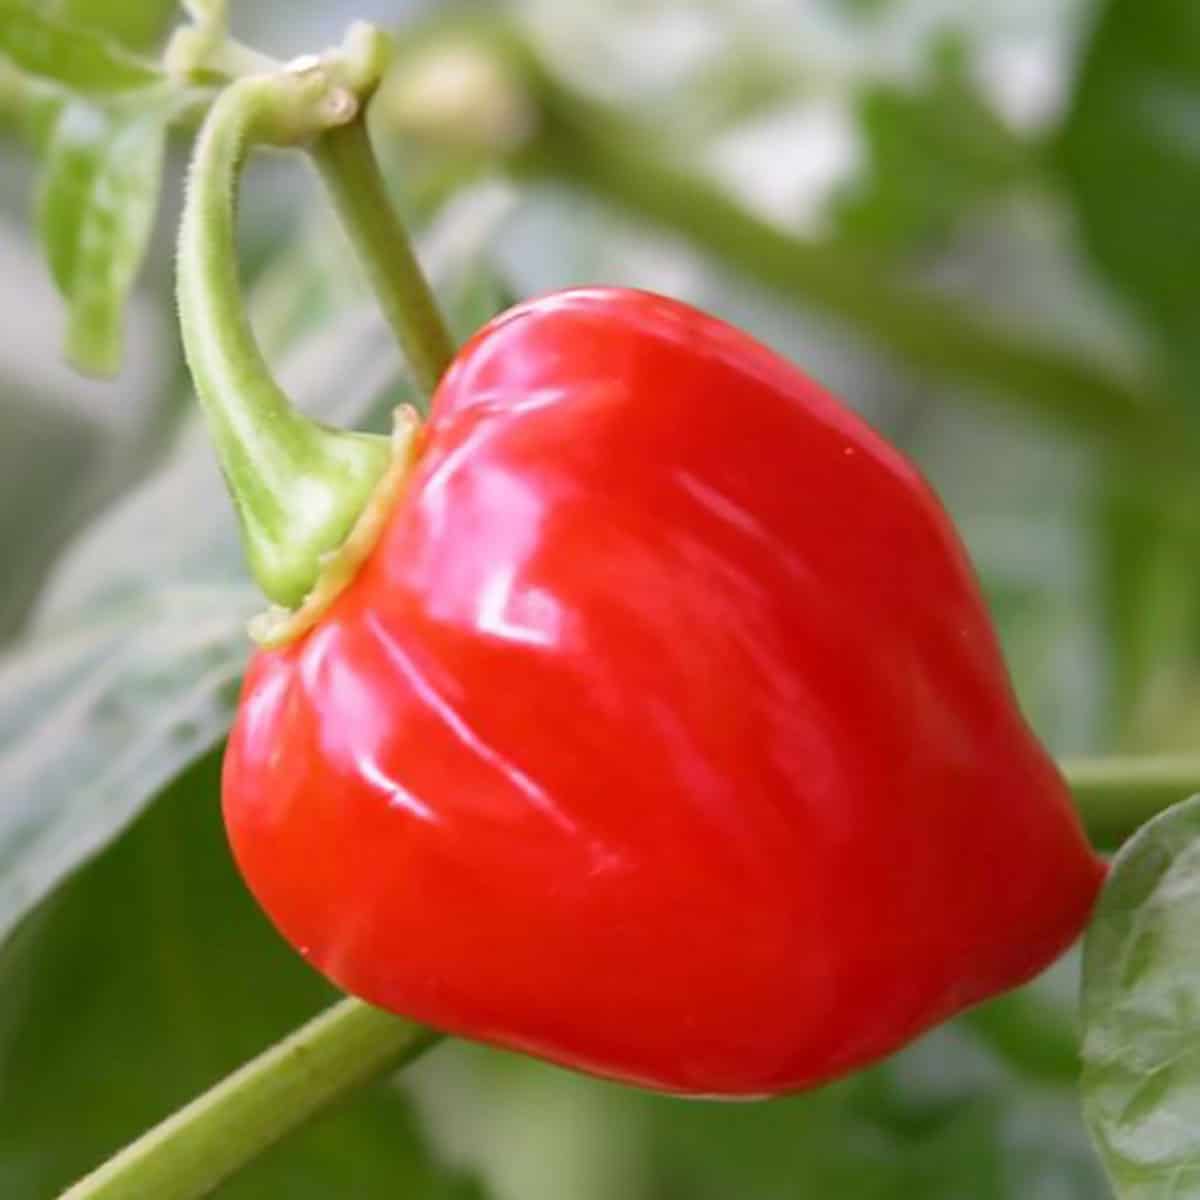 red savina pepper hanging in the plant